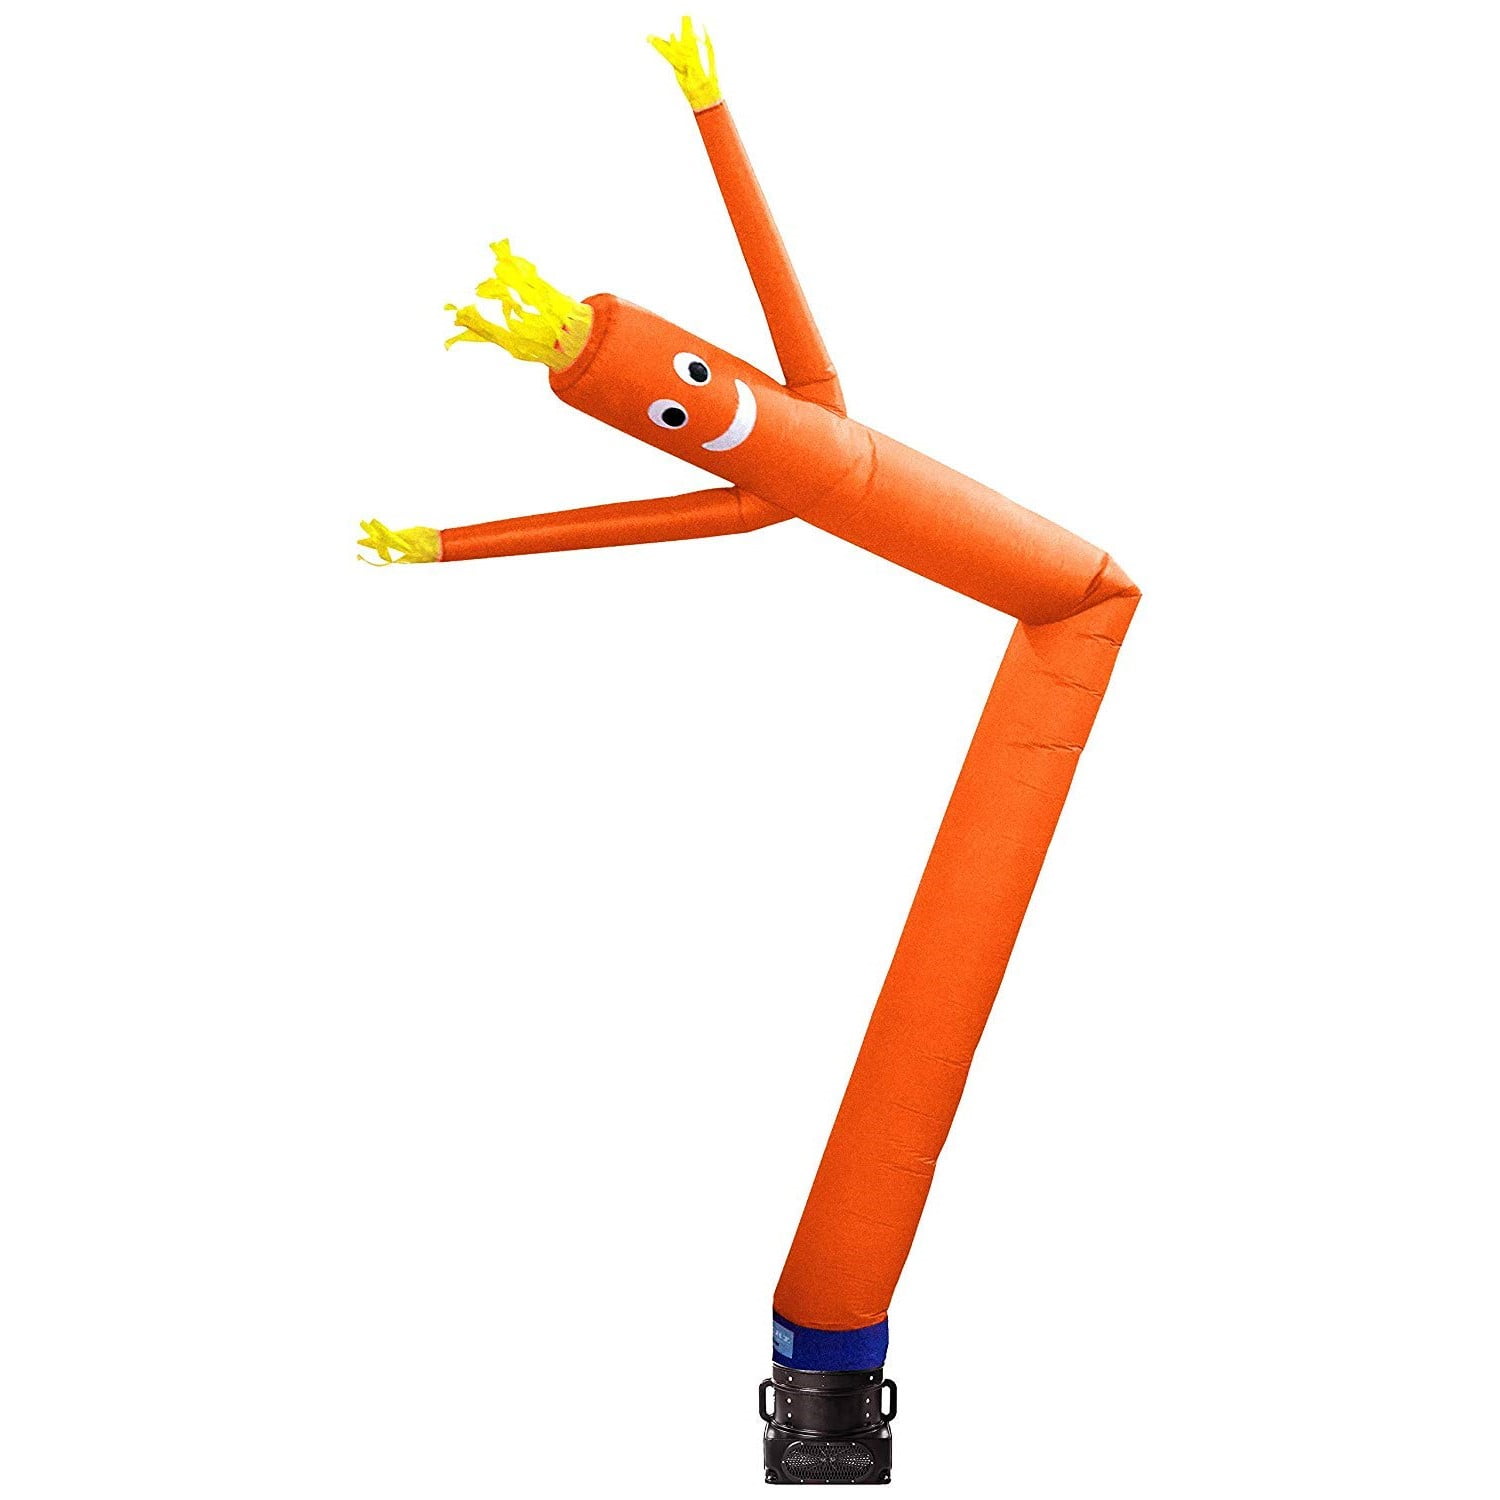 Sky Dancers 20ft Tall Inflatable Tube Man Puppet Attachment Blower Not Included Purple